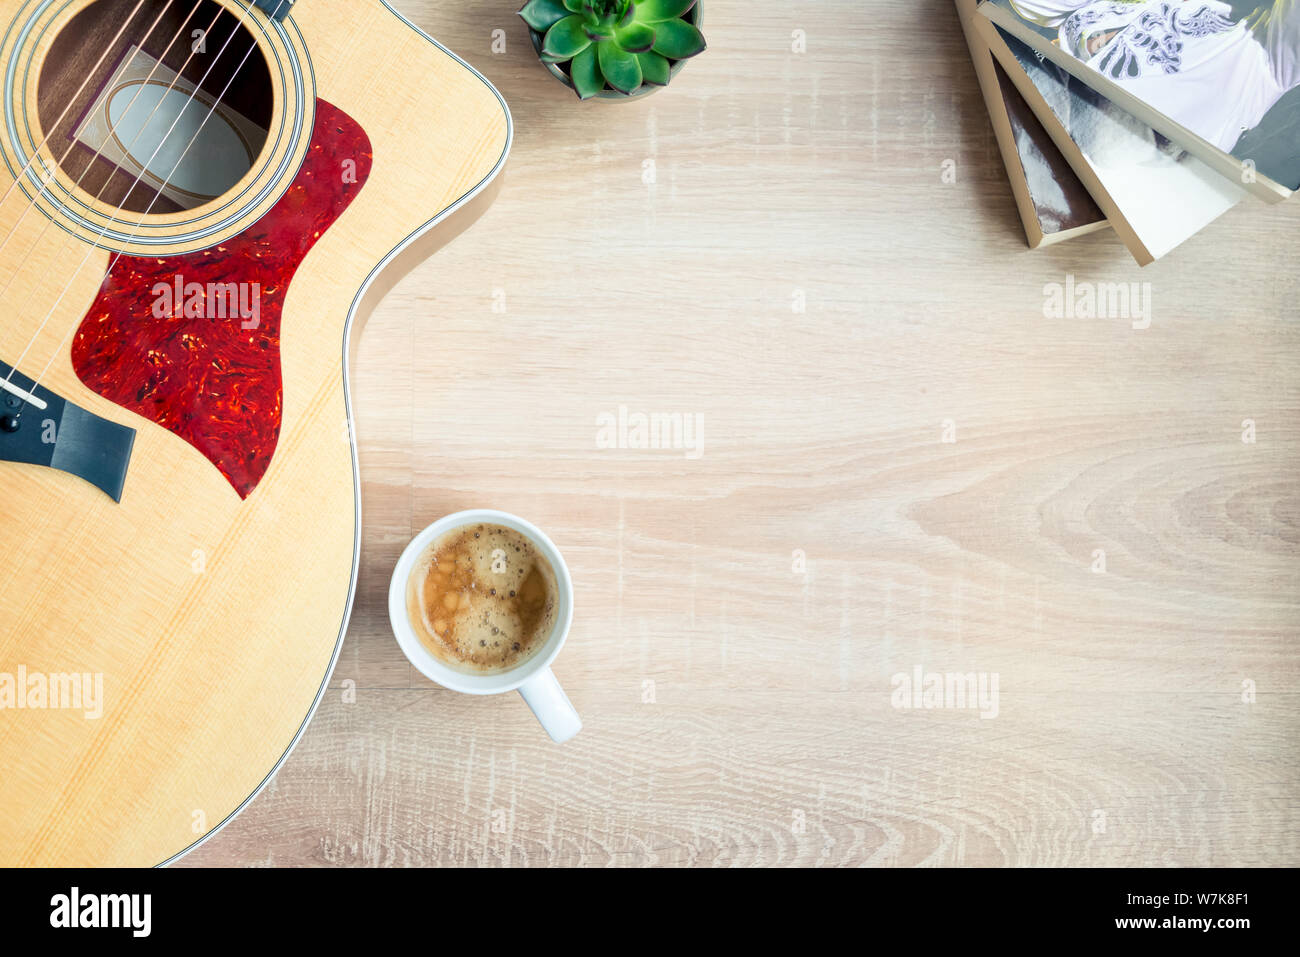 Top view of cosy home scene. Guitar, books, cup of coffee and succulent plants over wooden background. Copy space. Stock Photo